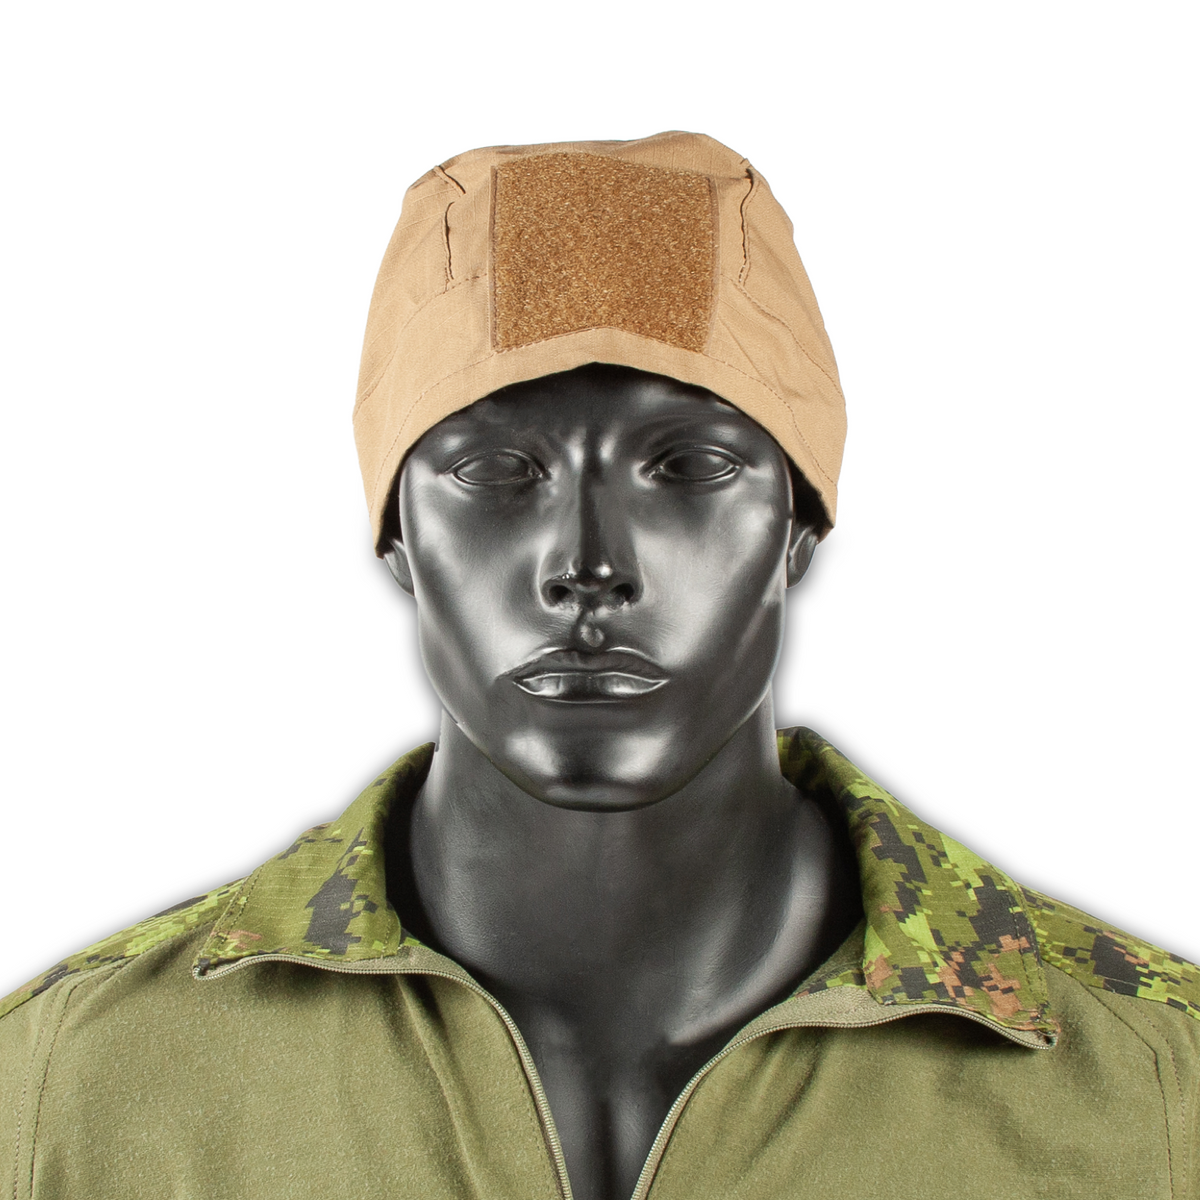 Surgical cap men, scrub caps, scrub hats, surgery hat, camouflage army